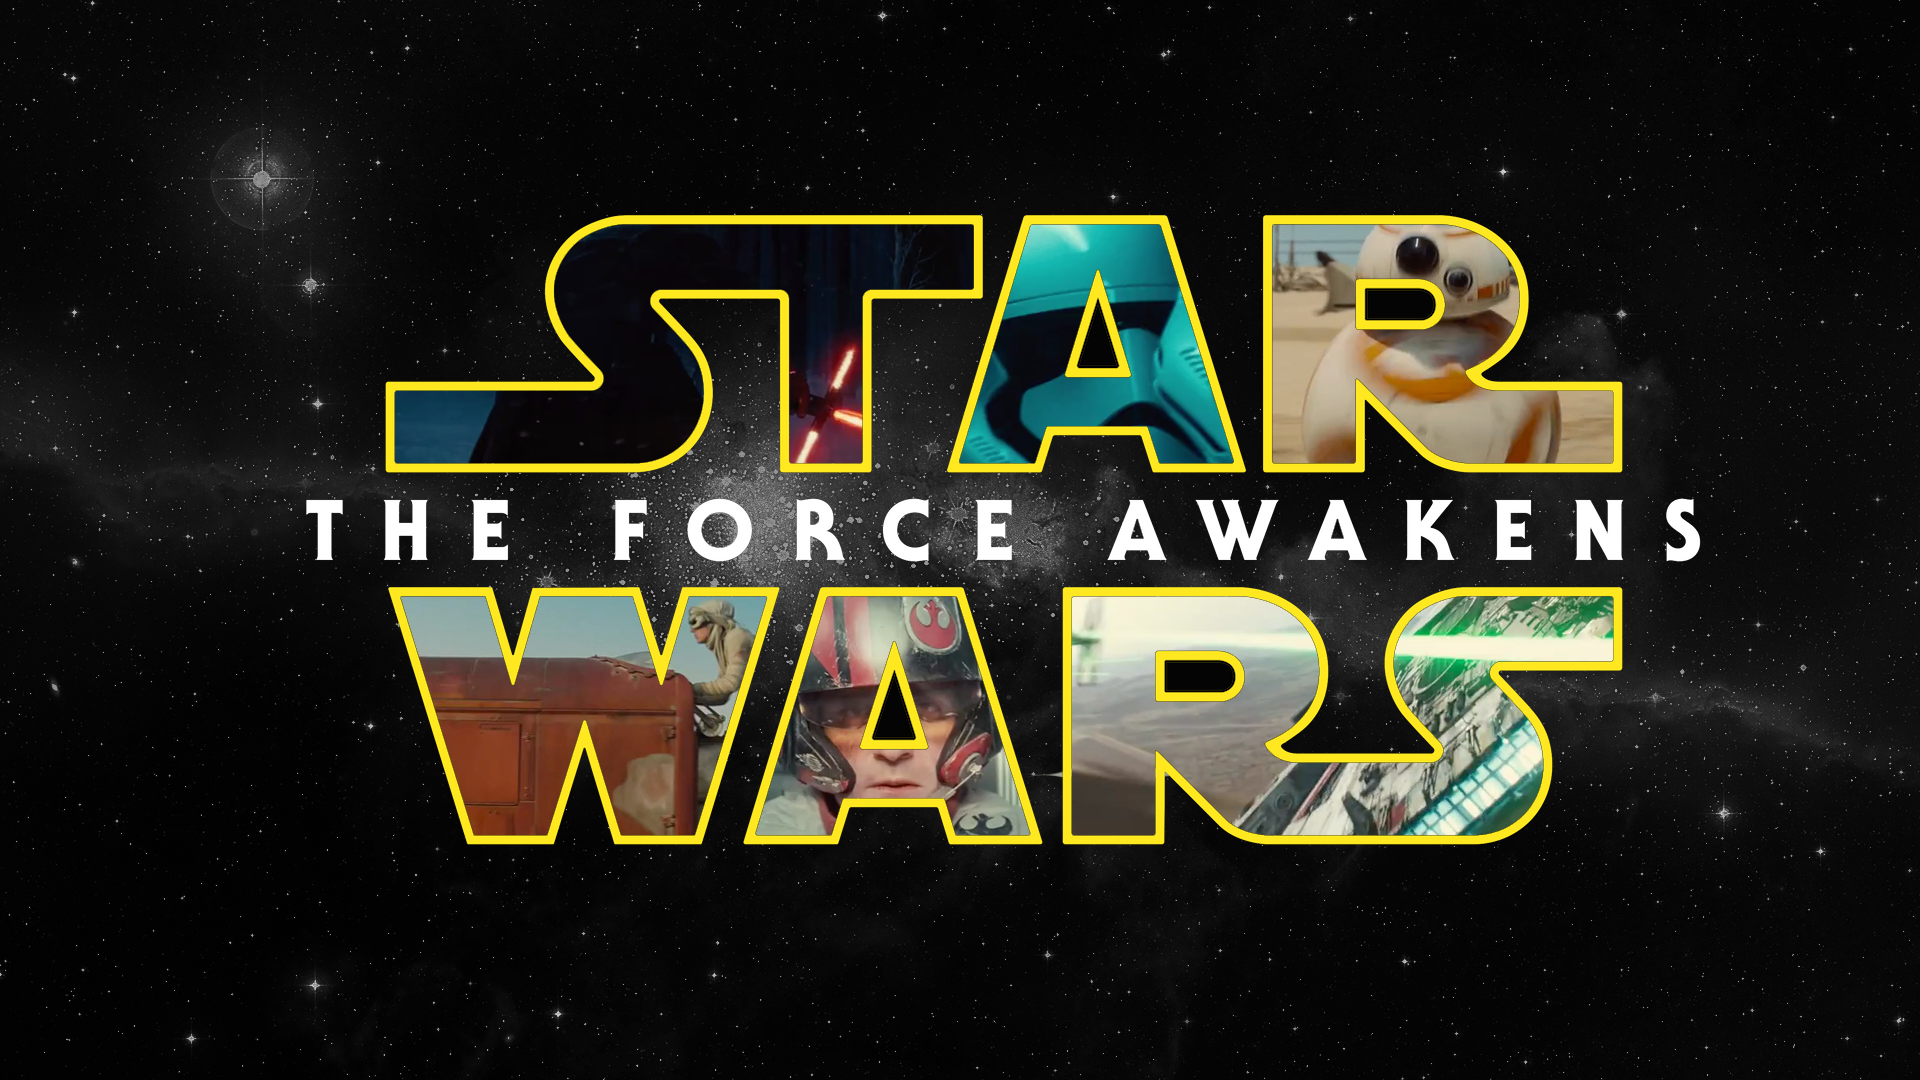 Star Wars Ep. VII: The Force Awakens for ios instal free